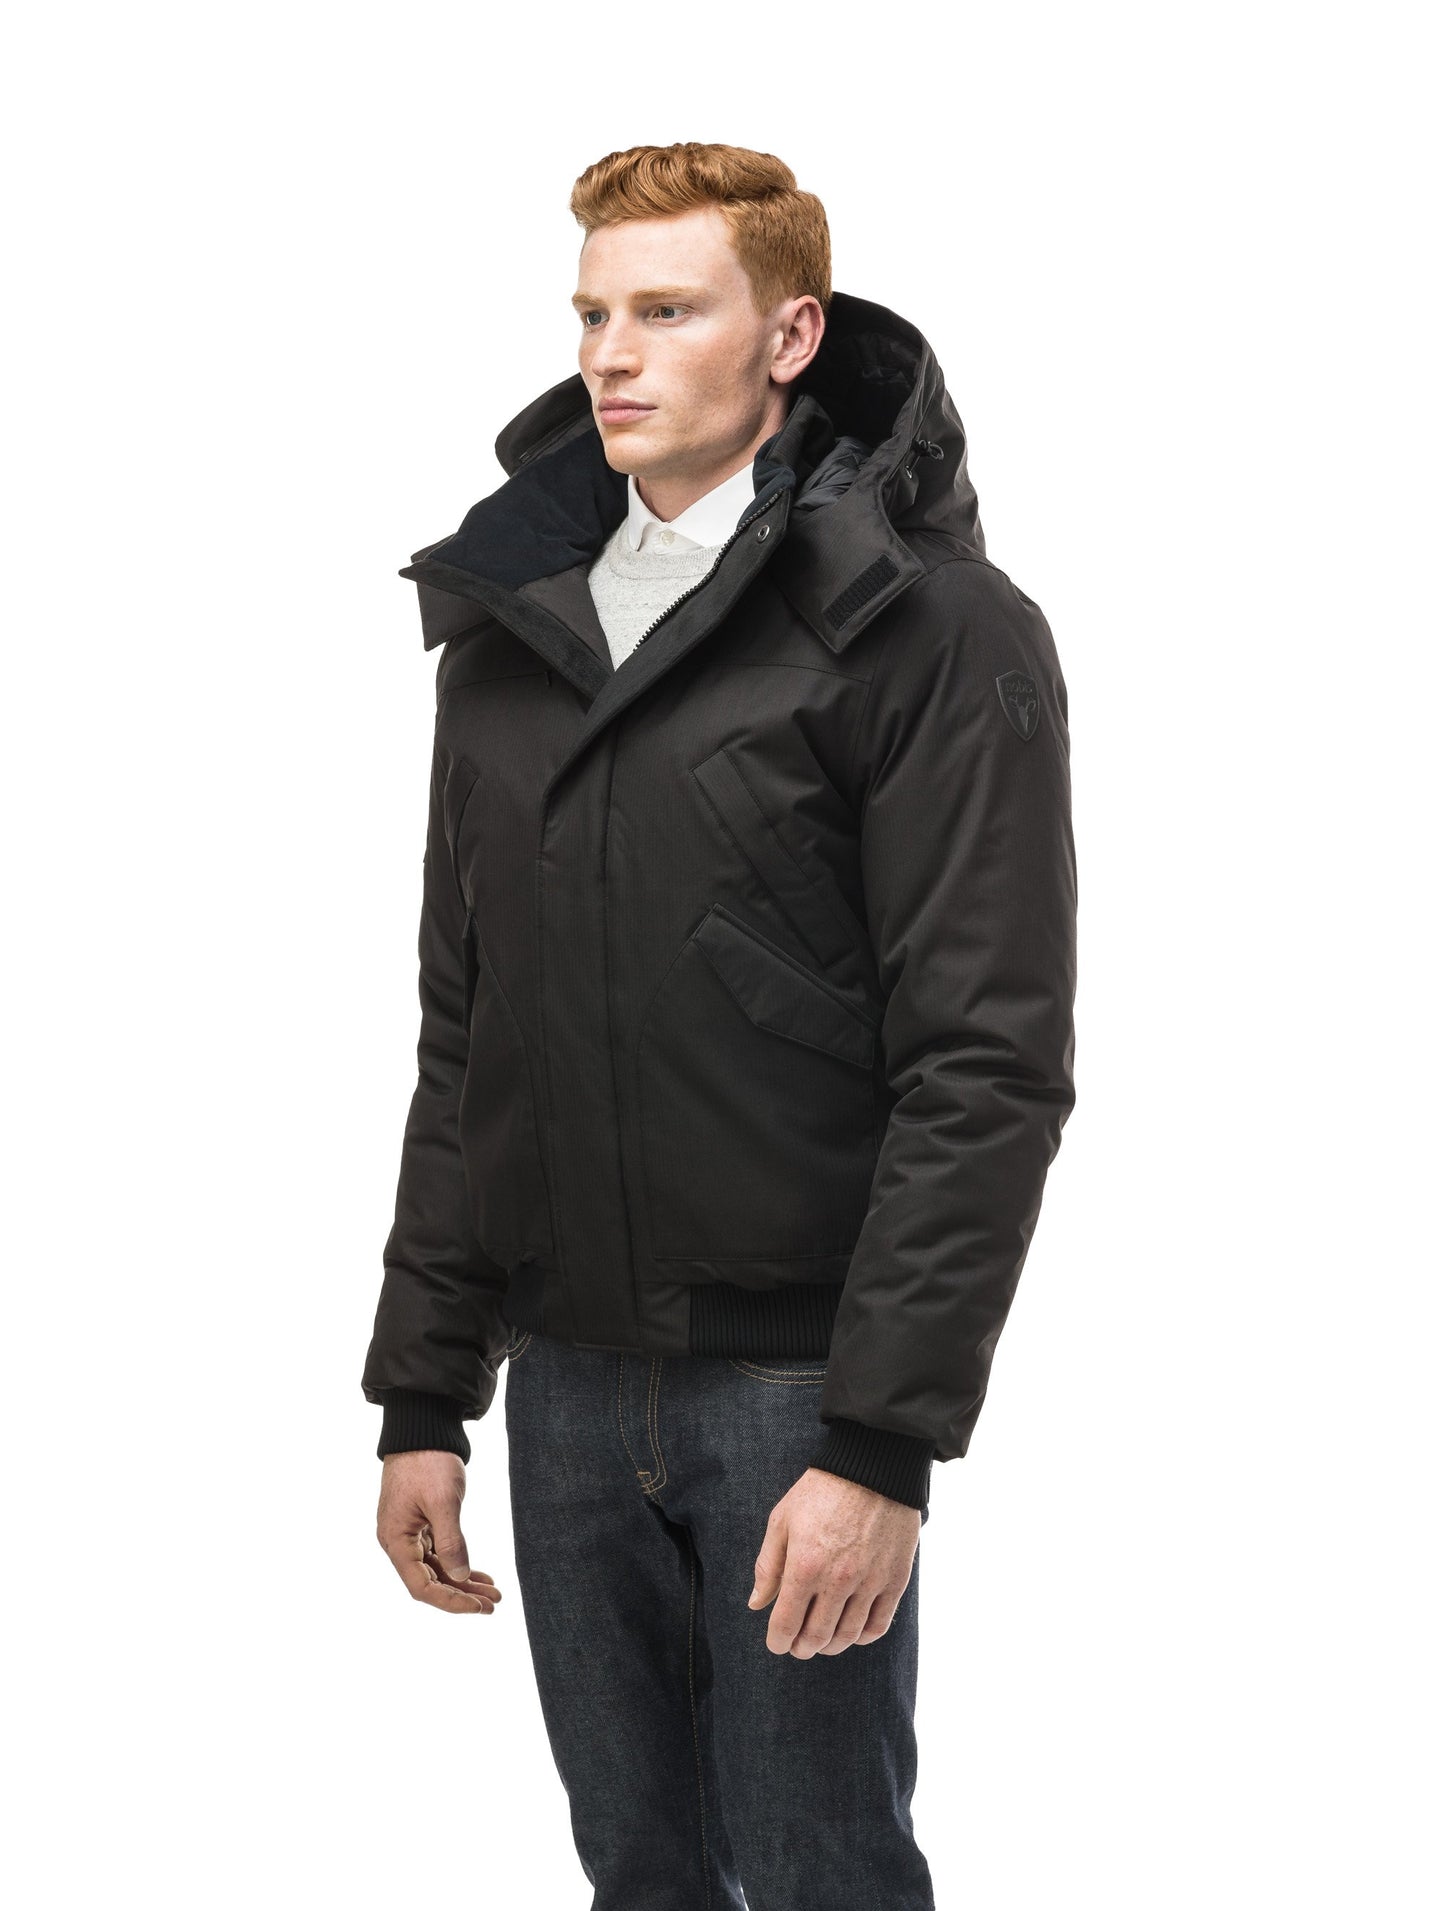 Men's classic down filled bomber jacket with a down filledÂ hood that features a removable coyote fur trim and concealed moldable framing wire in Black